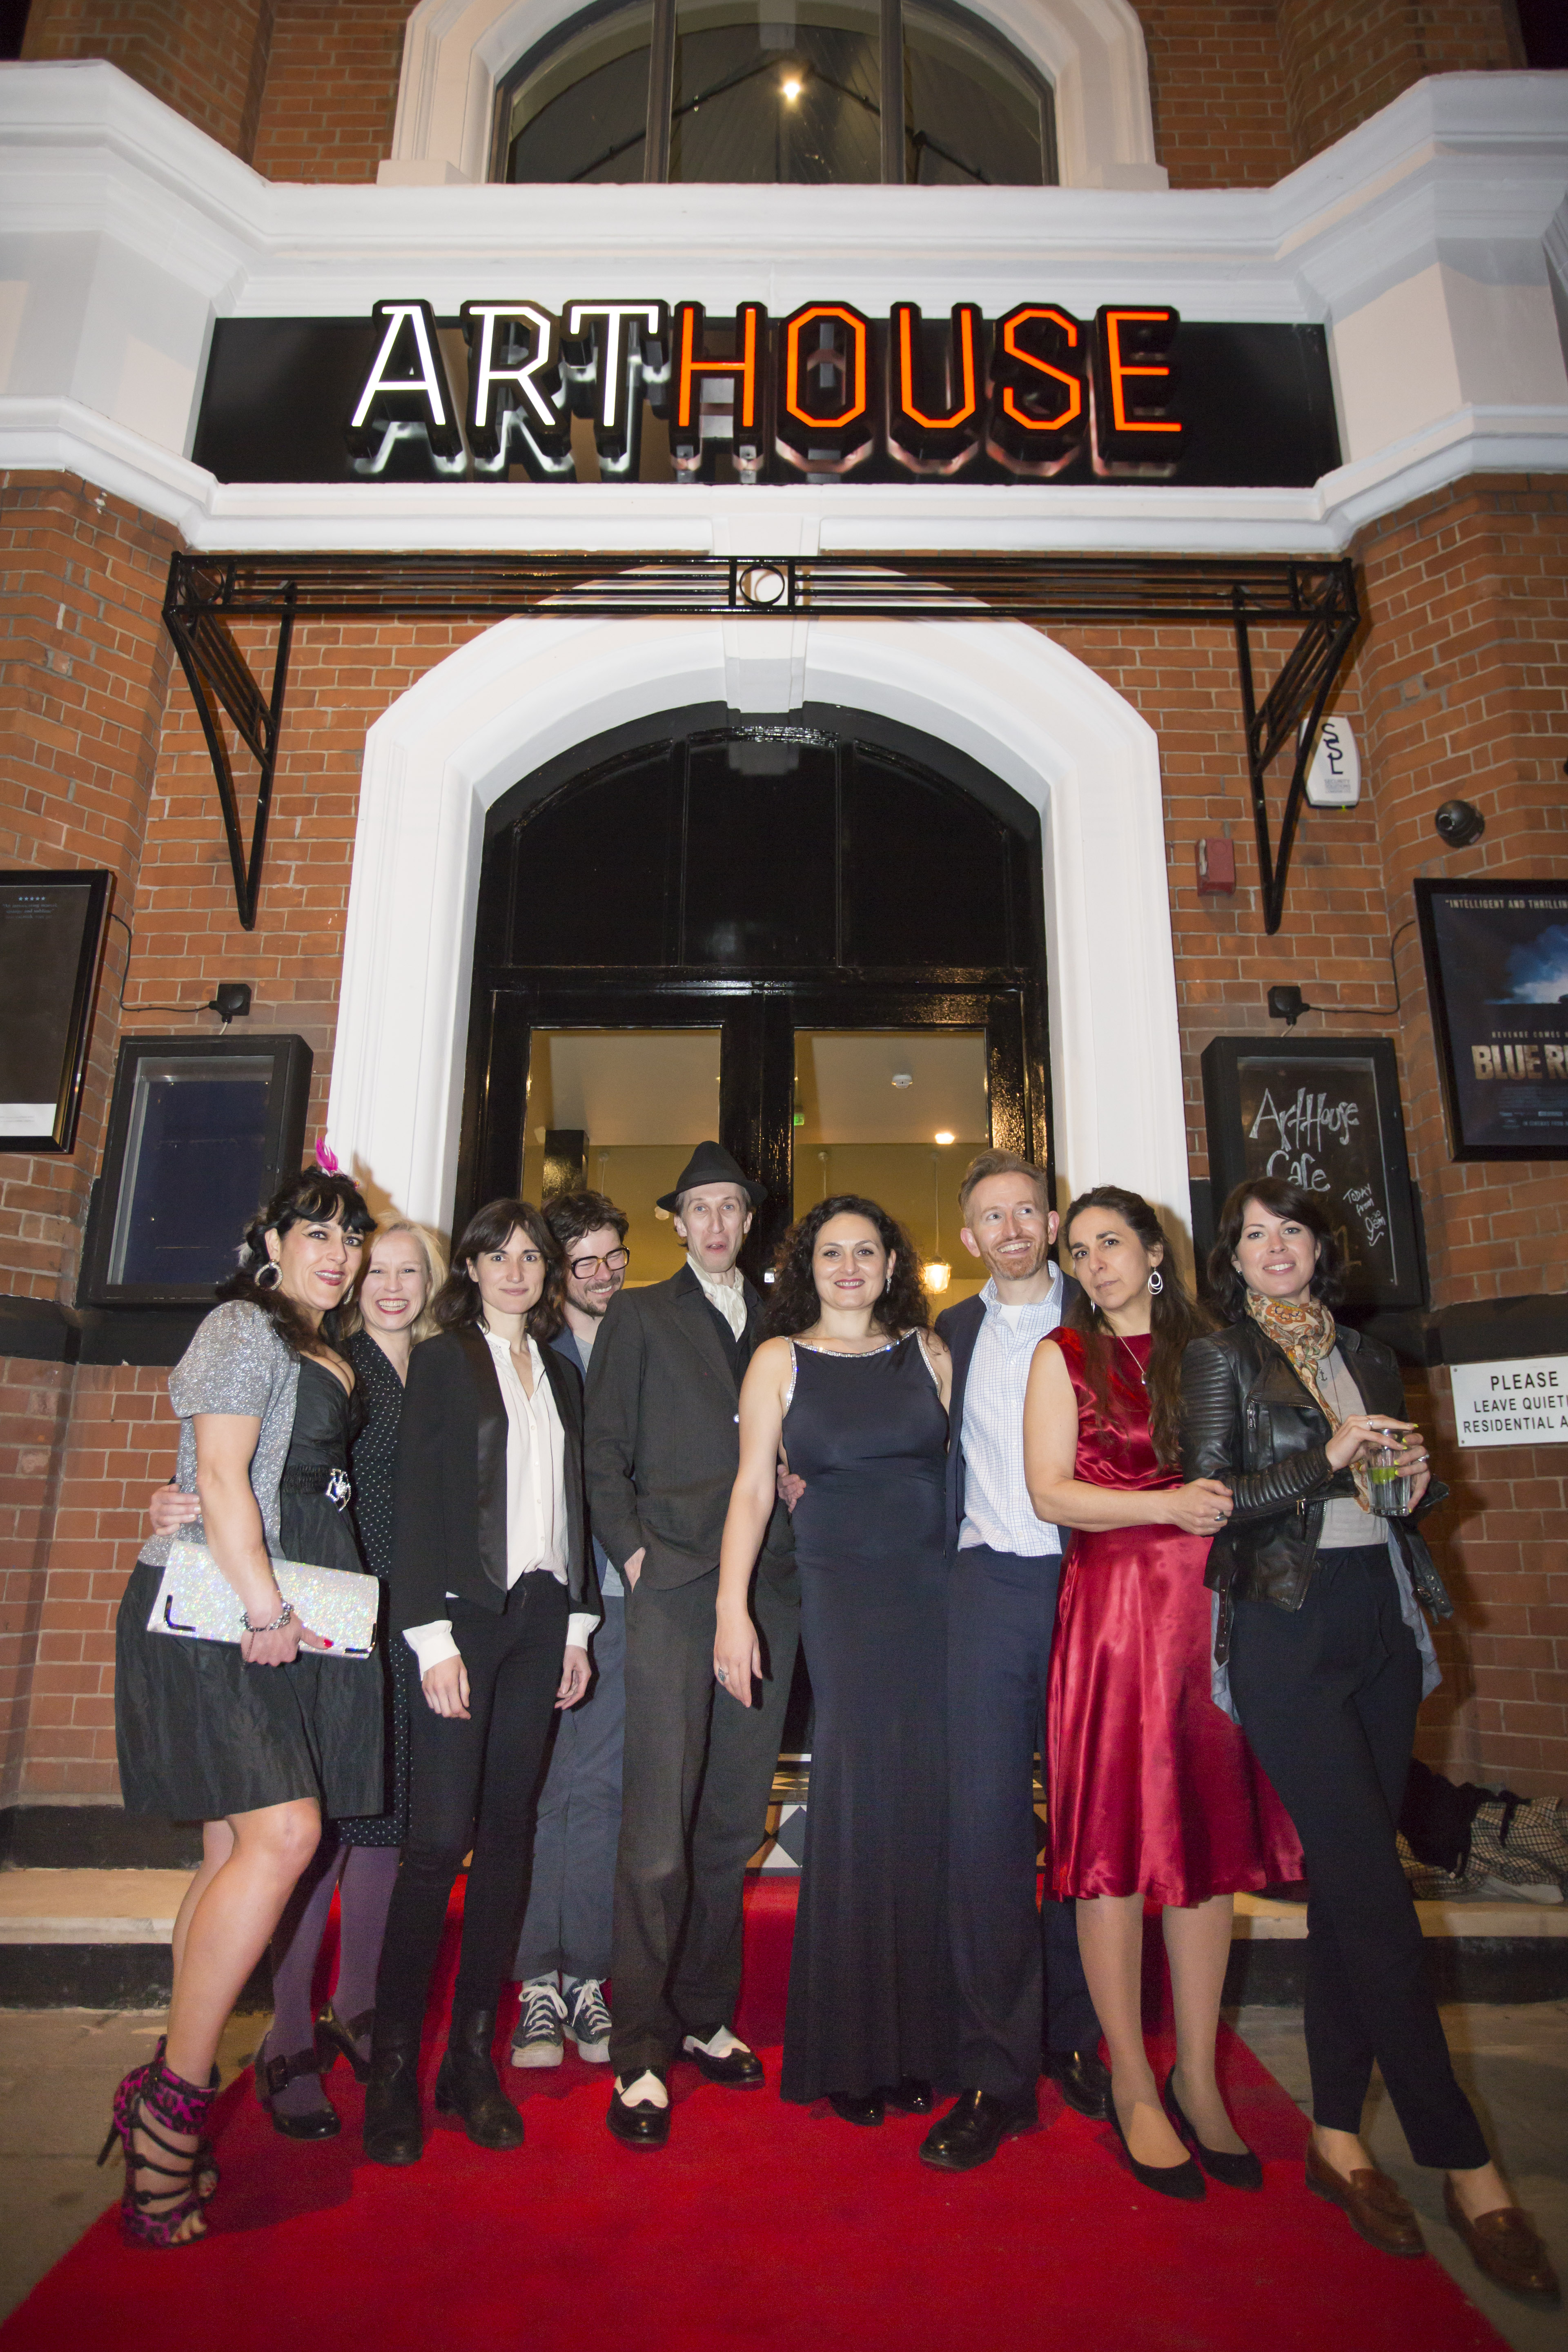 Group photo at a screening of L'Assenza outside the Art House Cinema in London. With producer Carey Born and actresses Lia Alù and Susanna Cappellaro.